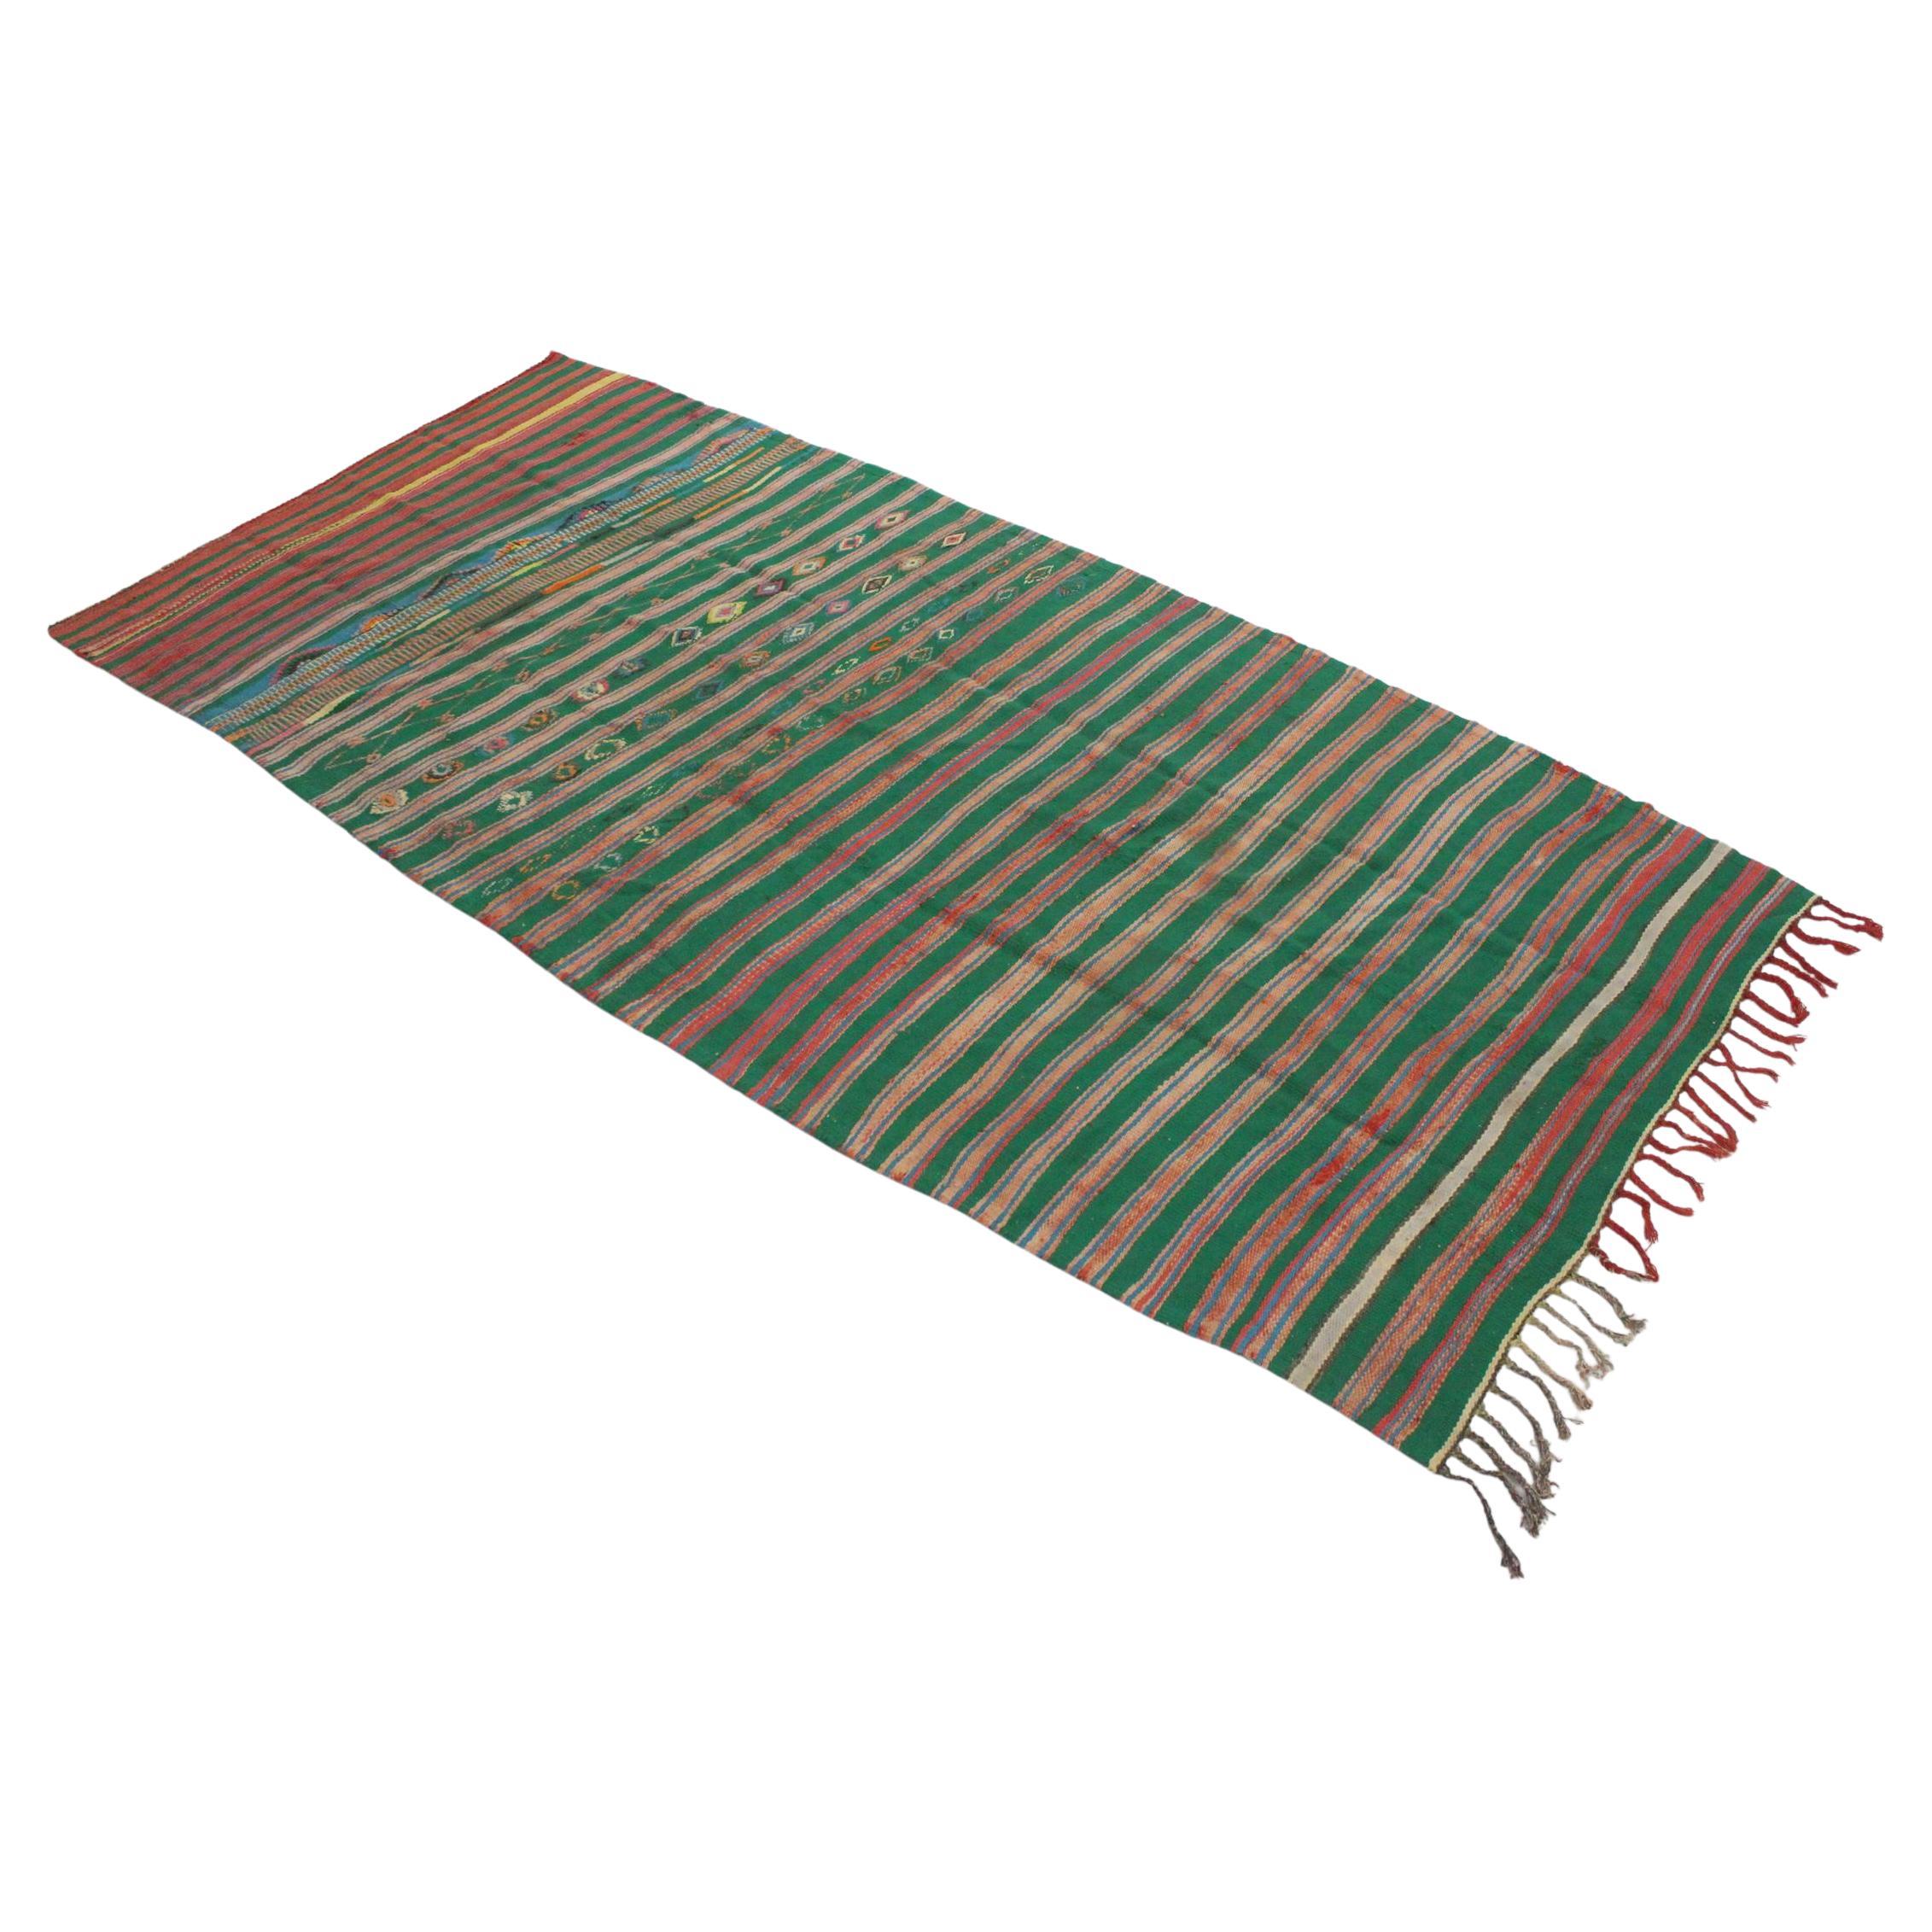 Vintage Moroccan striped kilim rug - Green/pink/red - 5.1x10.2feet / 157x312cm For Sale